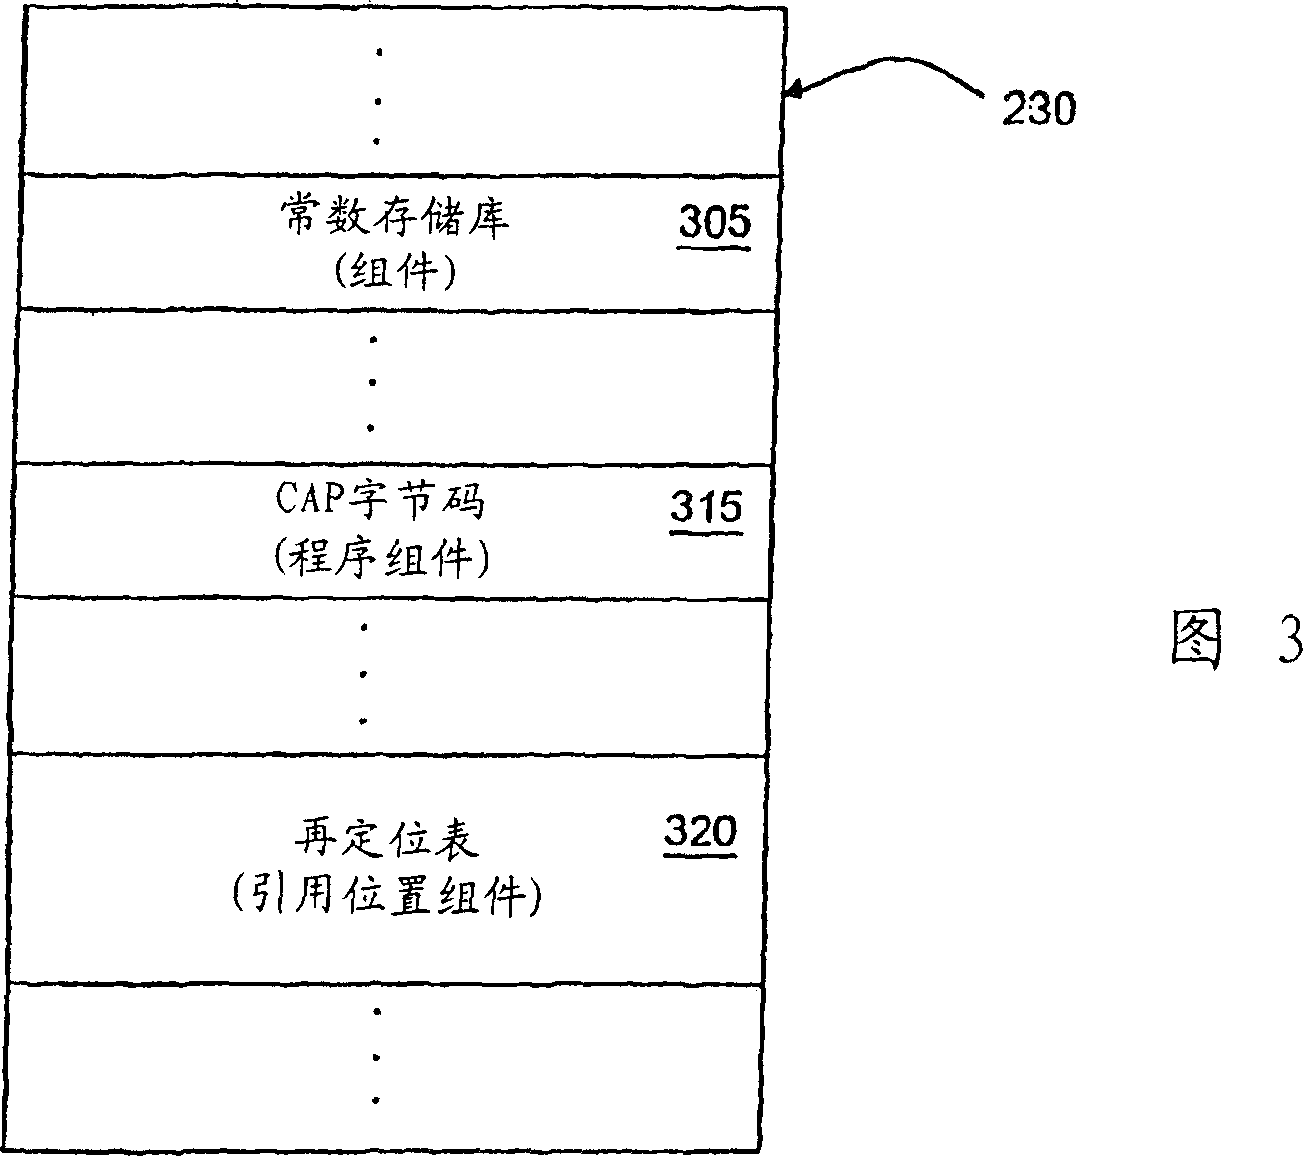 Method and apparatus for linking converted applet files